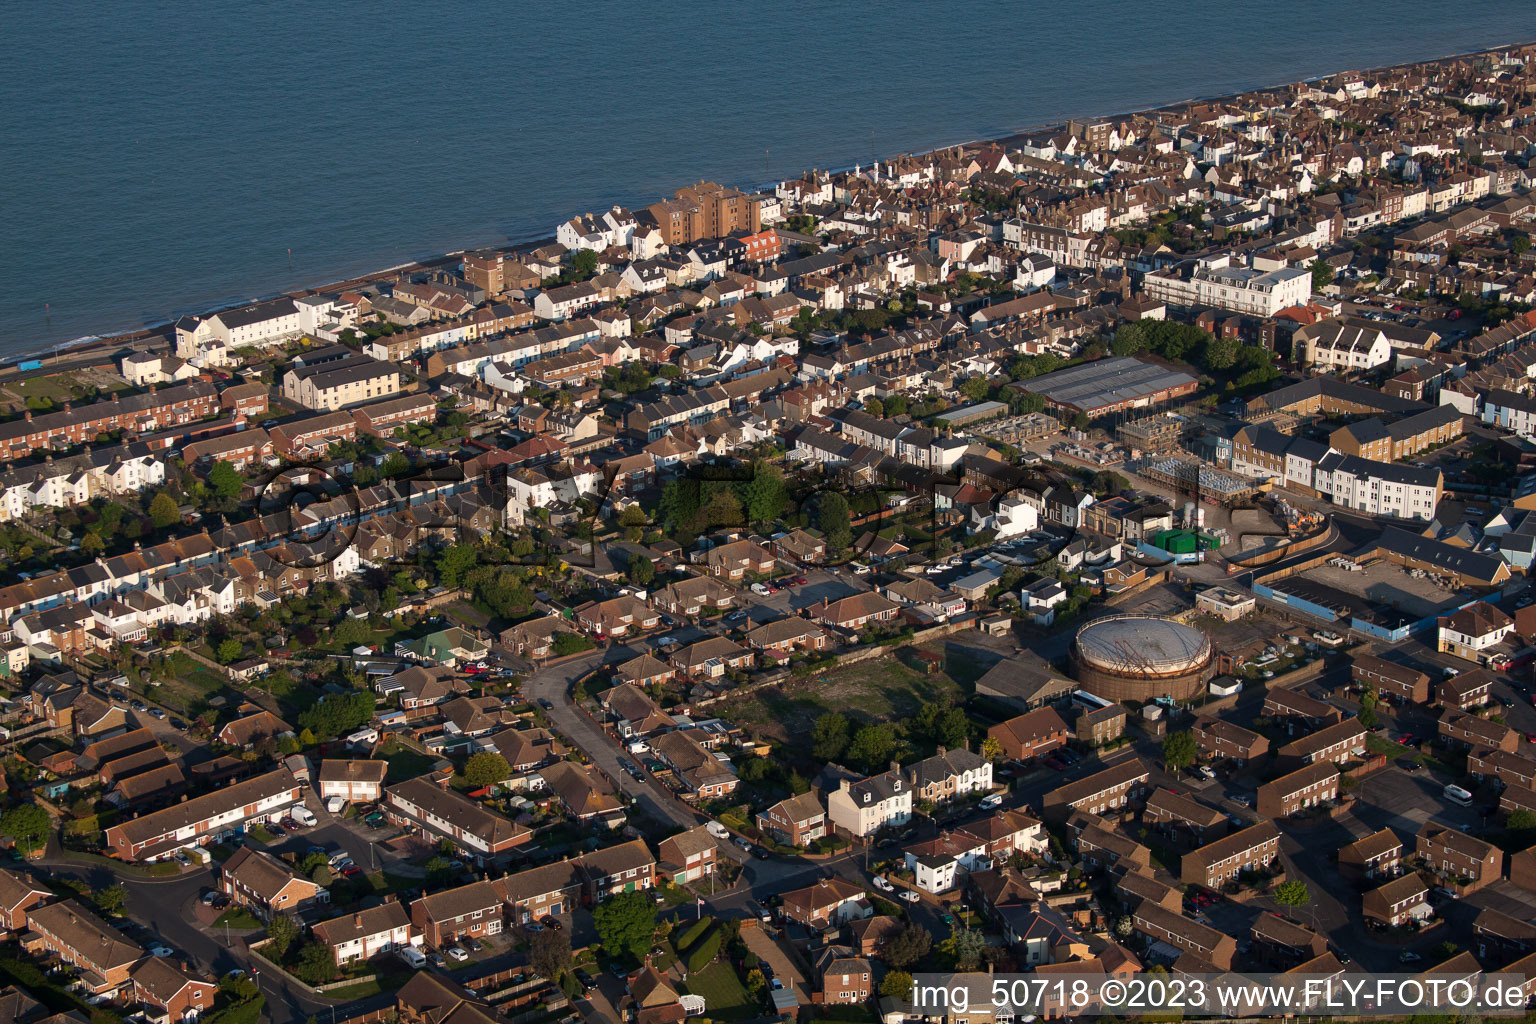 Deal in the state England, Great Britain viewn from the air